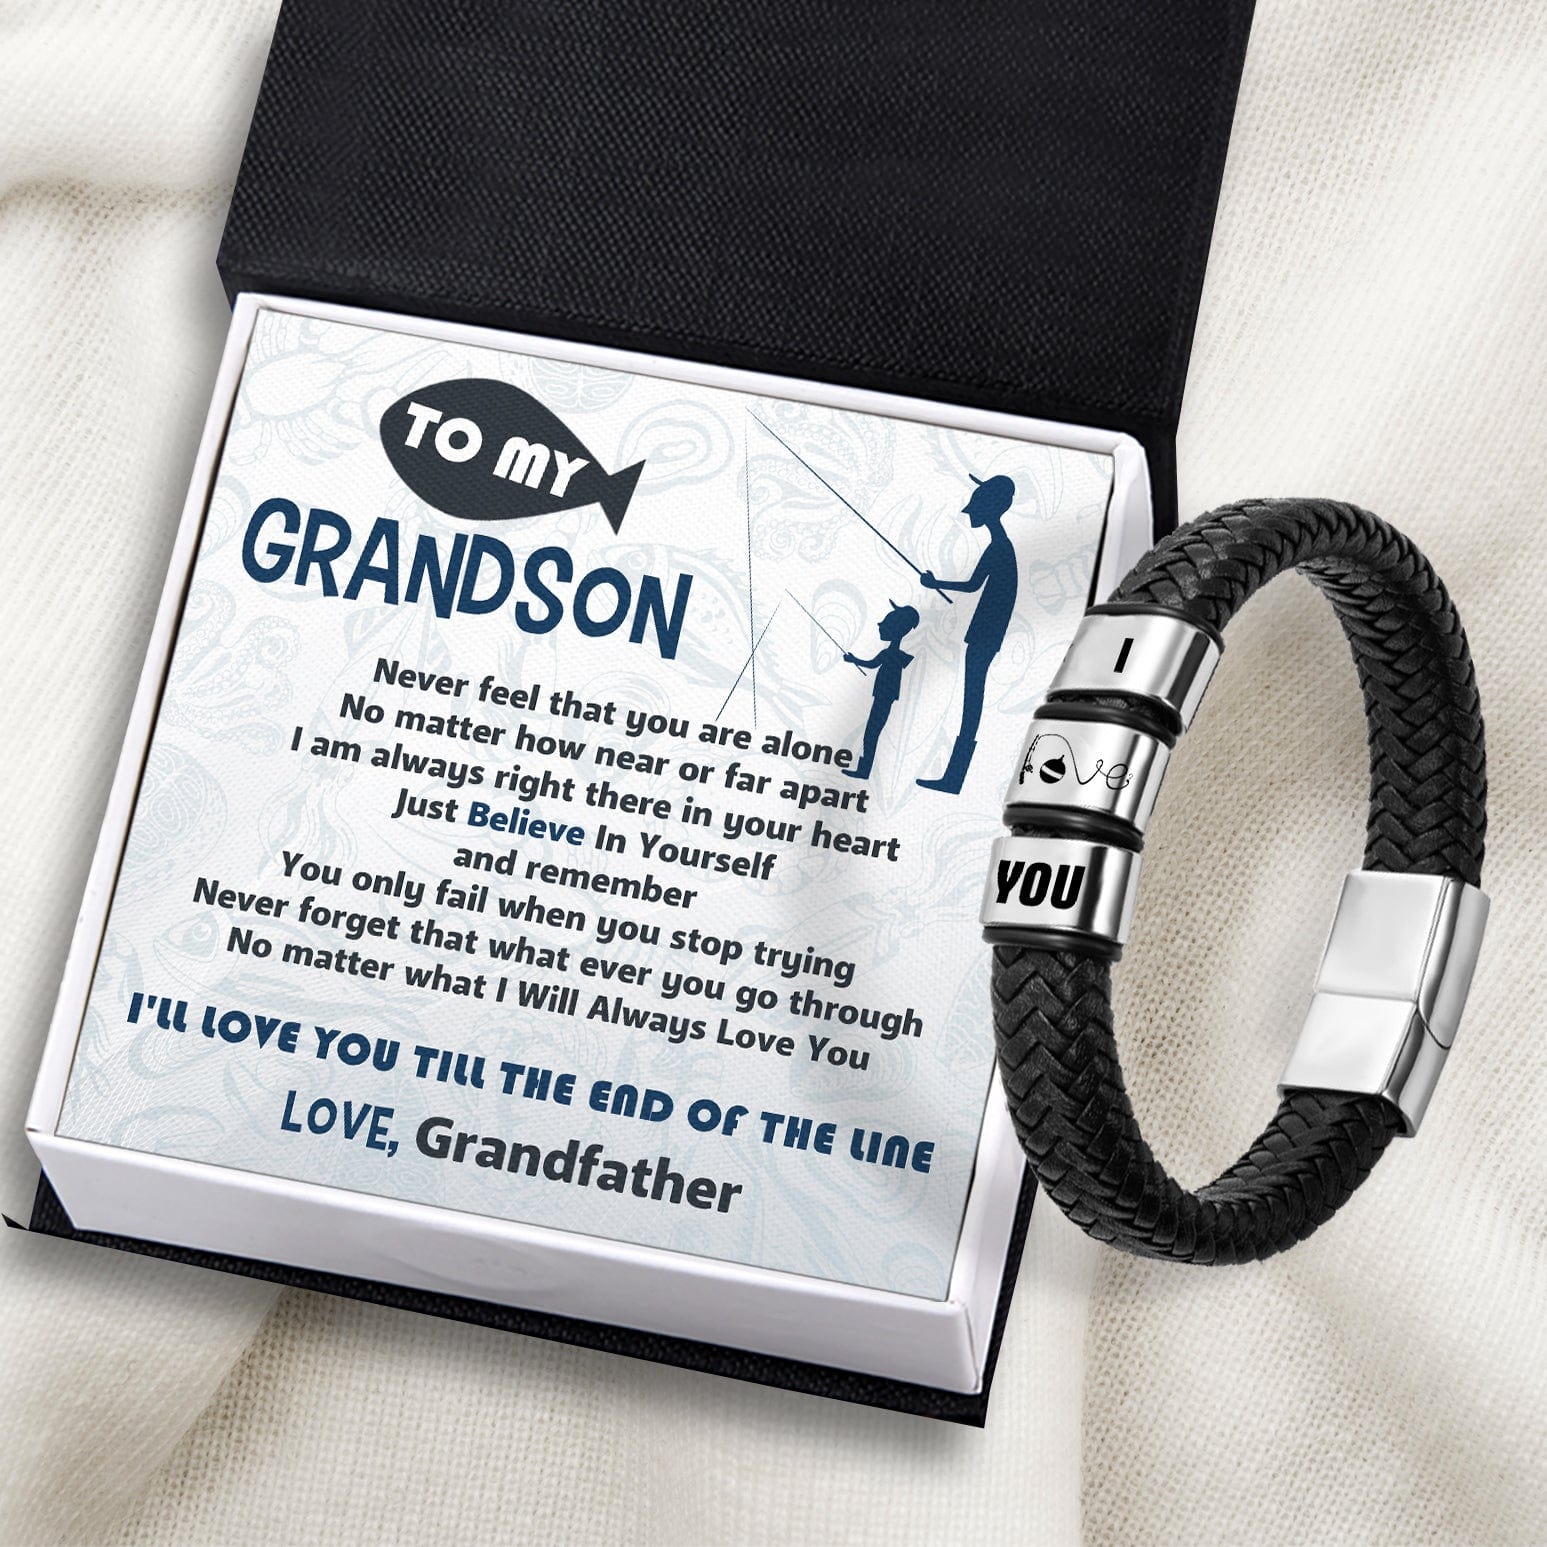 Leather Bracelet - Fishing - To My Grandson - I'll Love You Till The End Of The Line - Gbzl22017